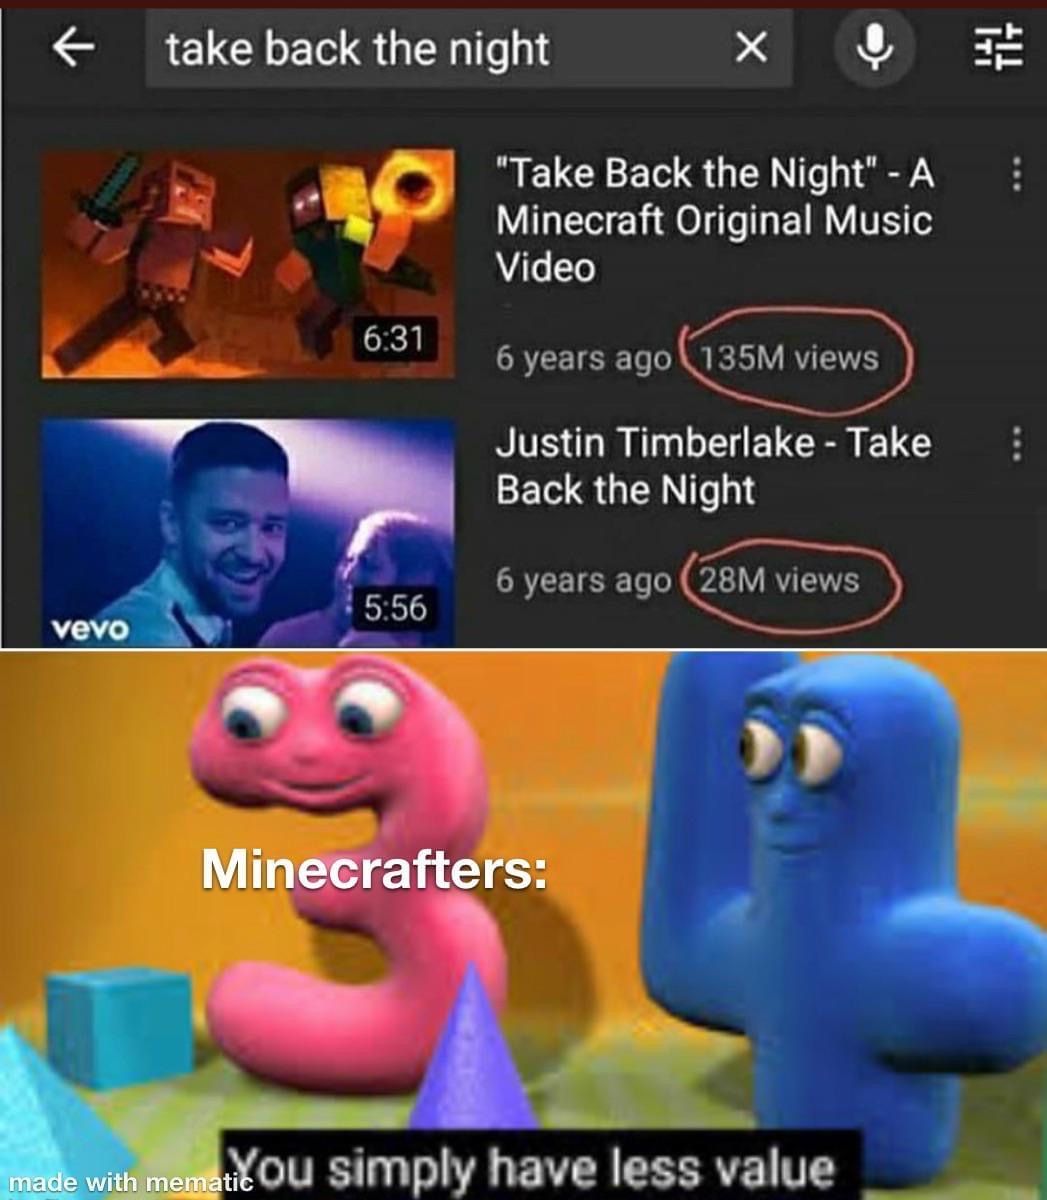 funny gaming memes - you simply have less value - take back the night "Take Back the Night" A Minecraft Original Music Video 6 years ago 135M views Justin Timberlake Take Back the Night 6 years ago 28M views vevo Minecrafters made with mematikou simply ha